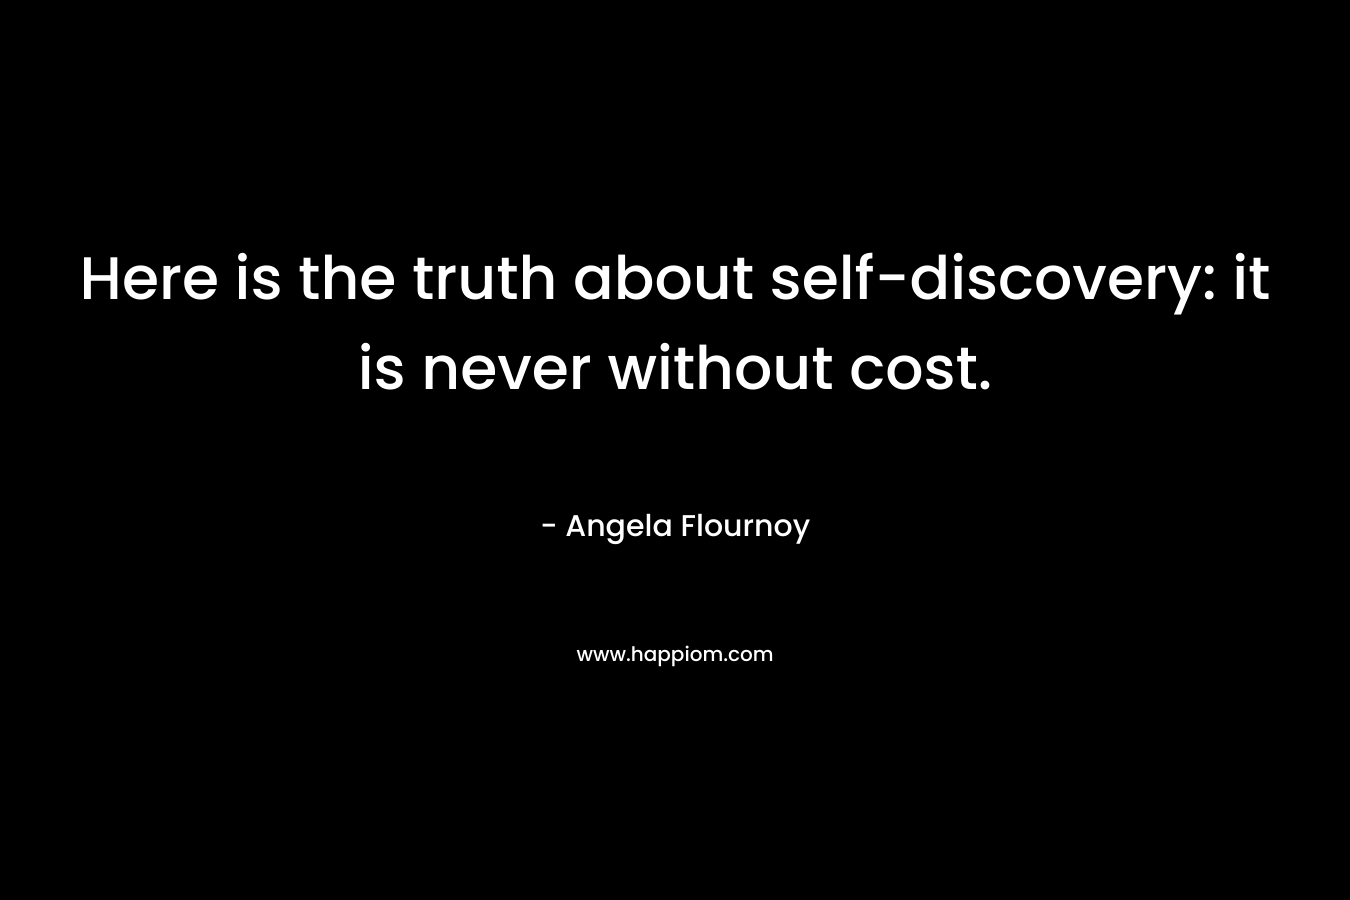 Here is the truth about self-discovery: it is never without cost. – Angela Flournoy